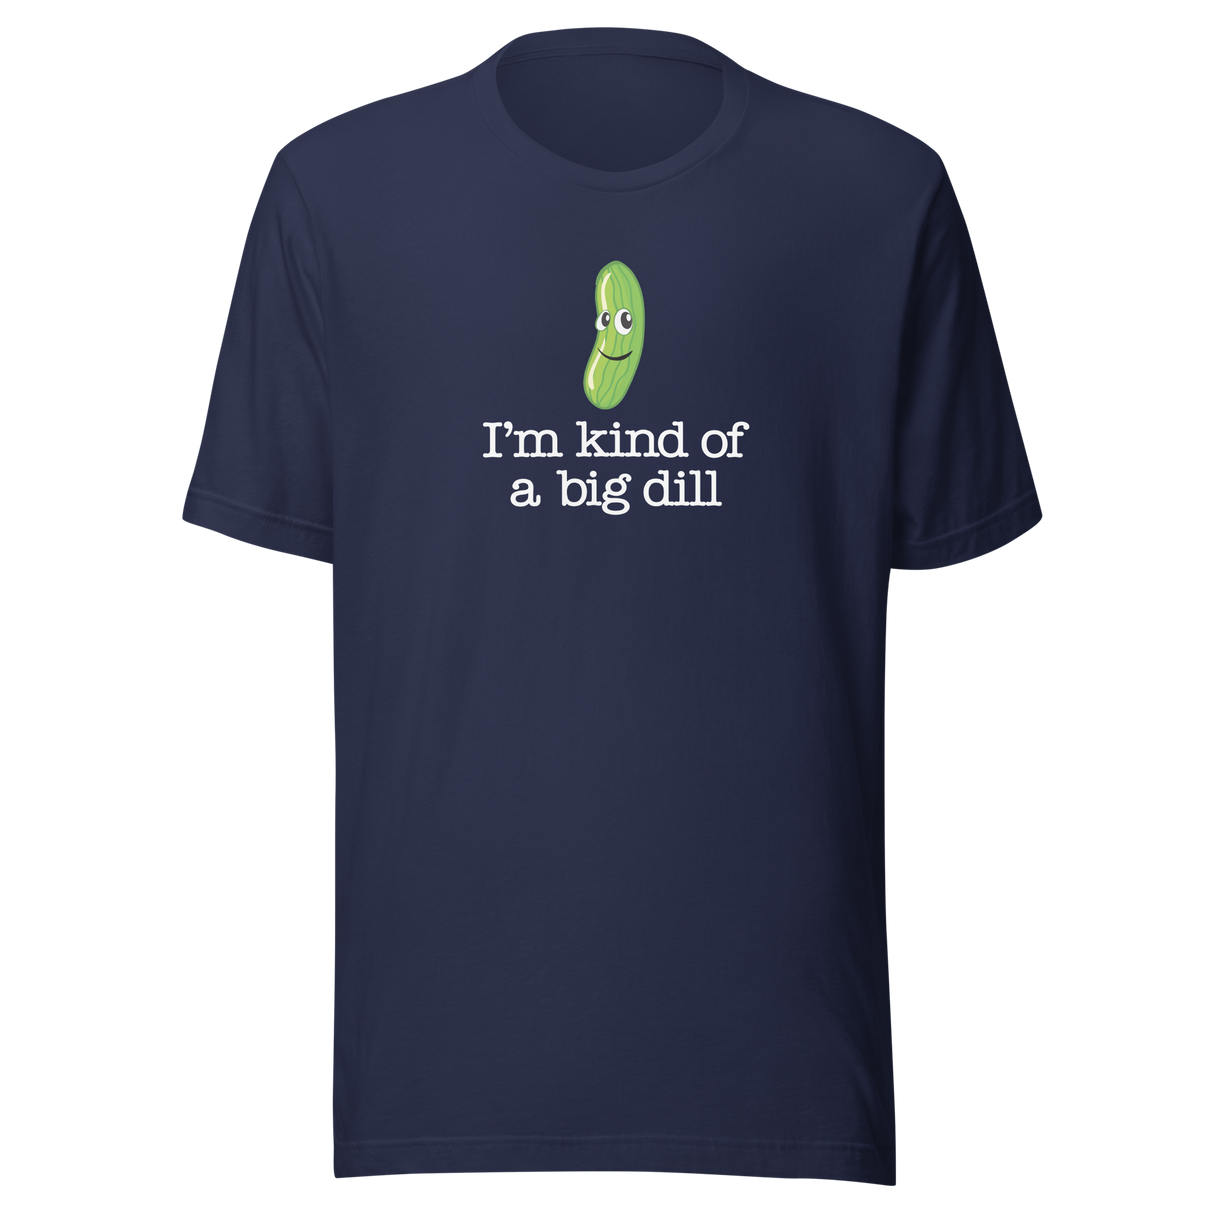 I'm Kind Of A Big Dill - Food Tee - Life T-Shirt - Punny Tee - Clever T-Shirt - Humorous Tee